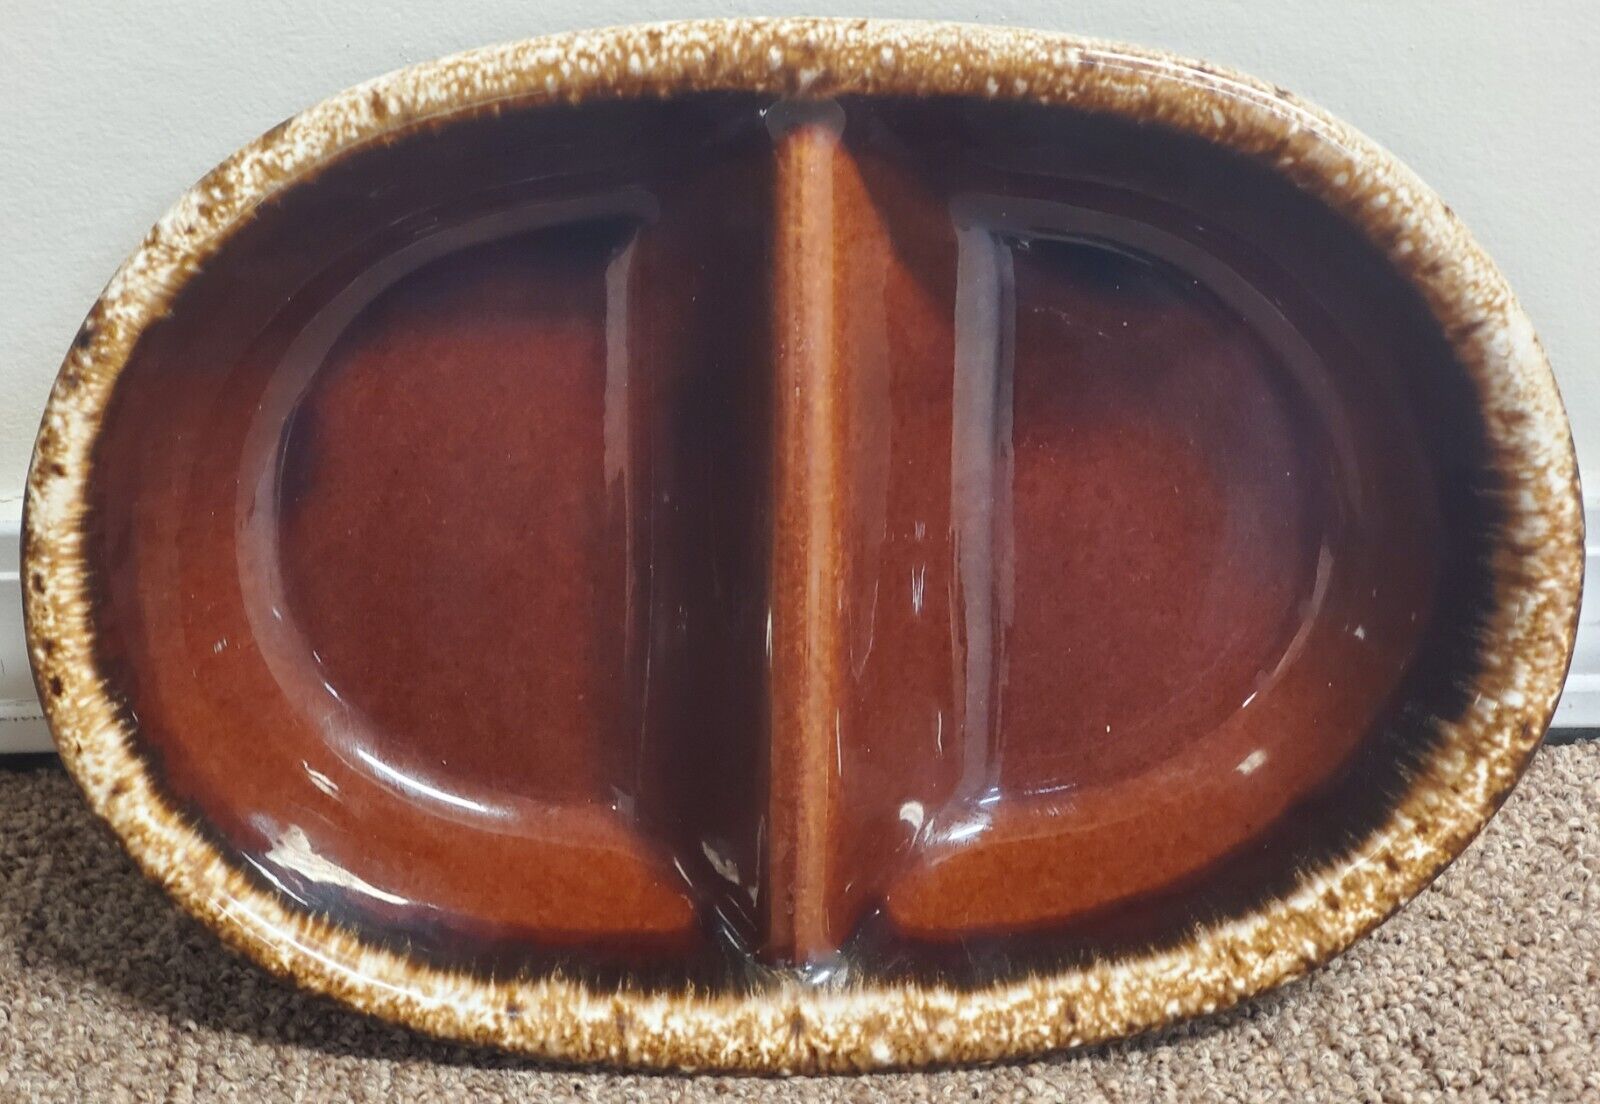 VINTAGE HULL POTTERY BROWN DRIP GLAZE DIVIDED SERVING BOWL DISH OVEN PROOF USA